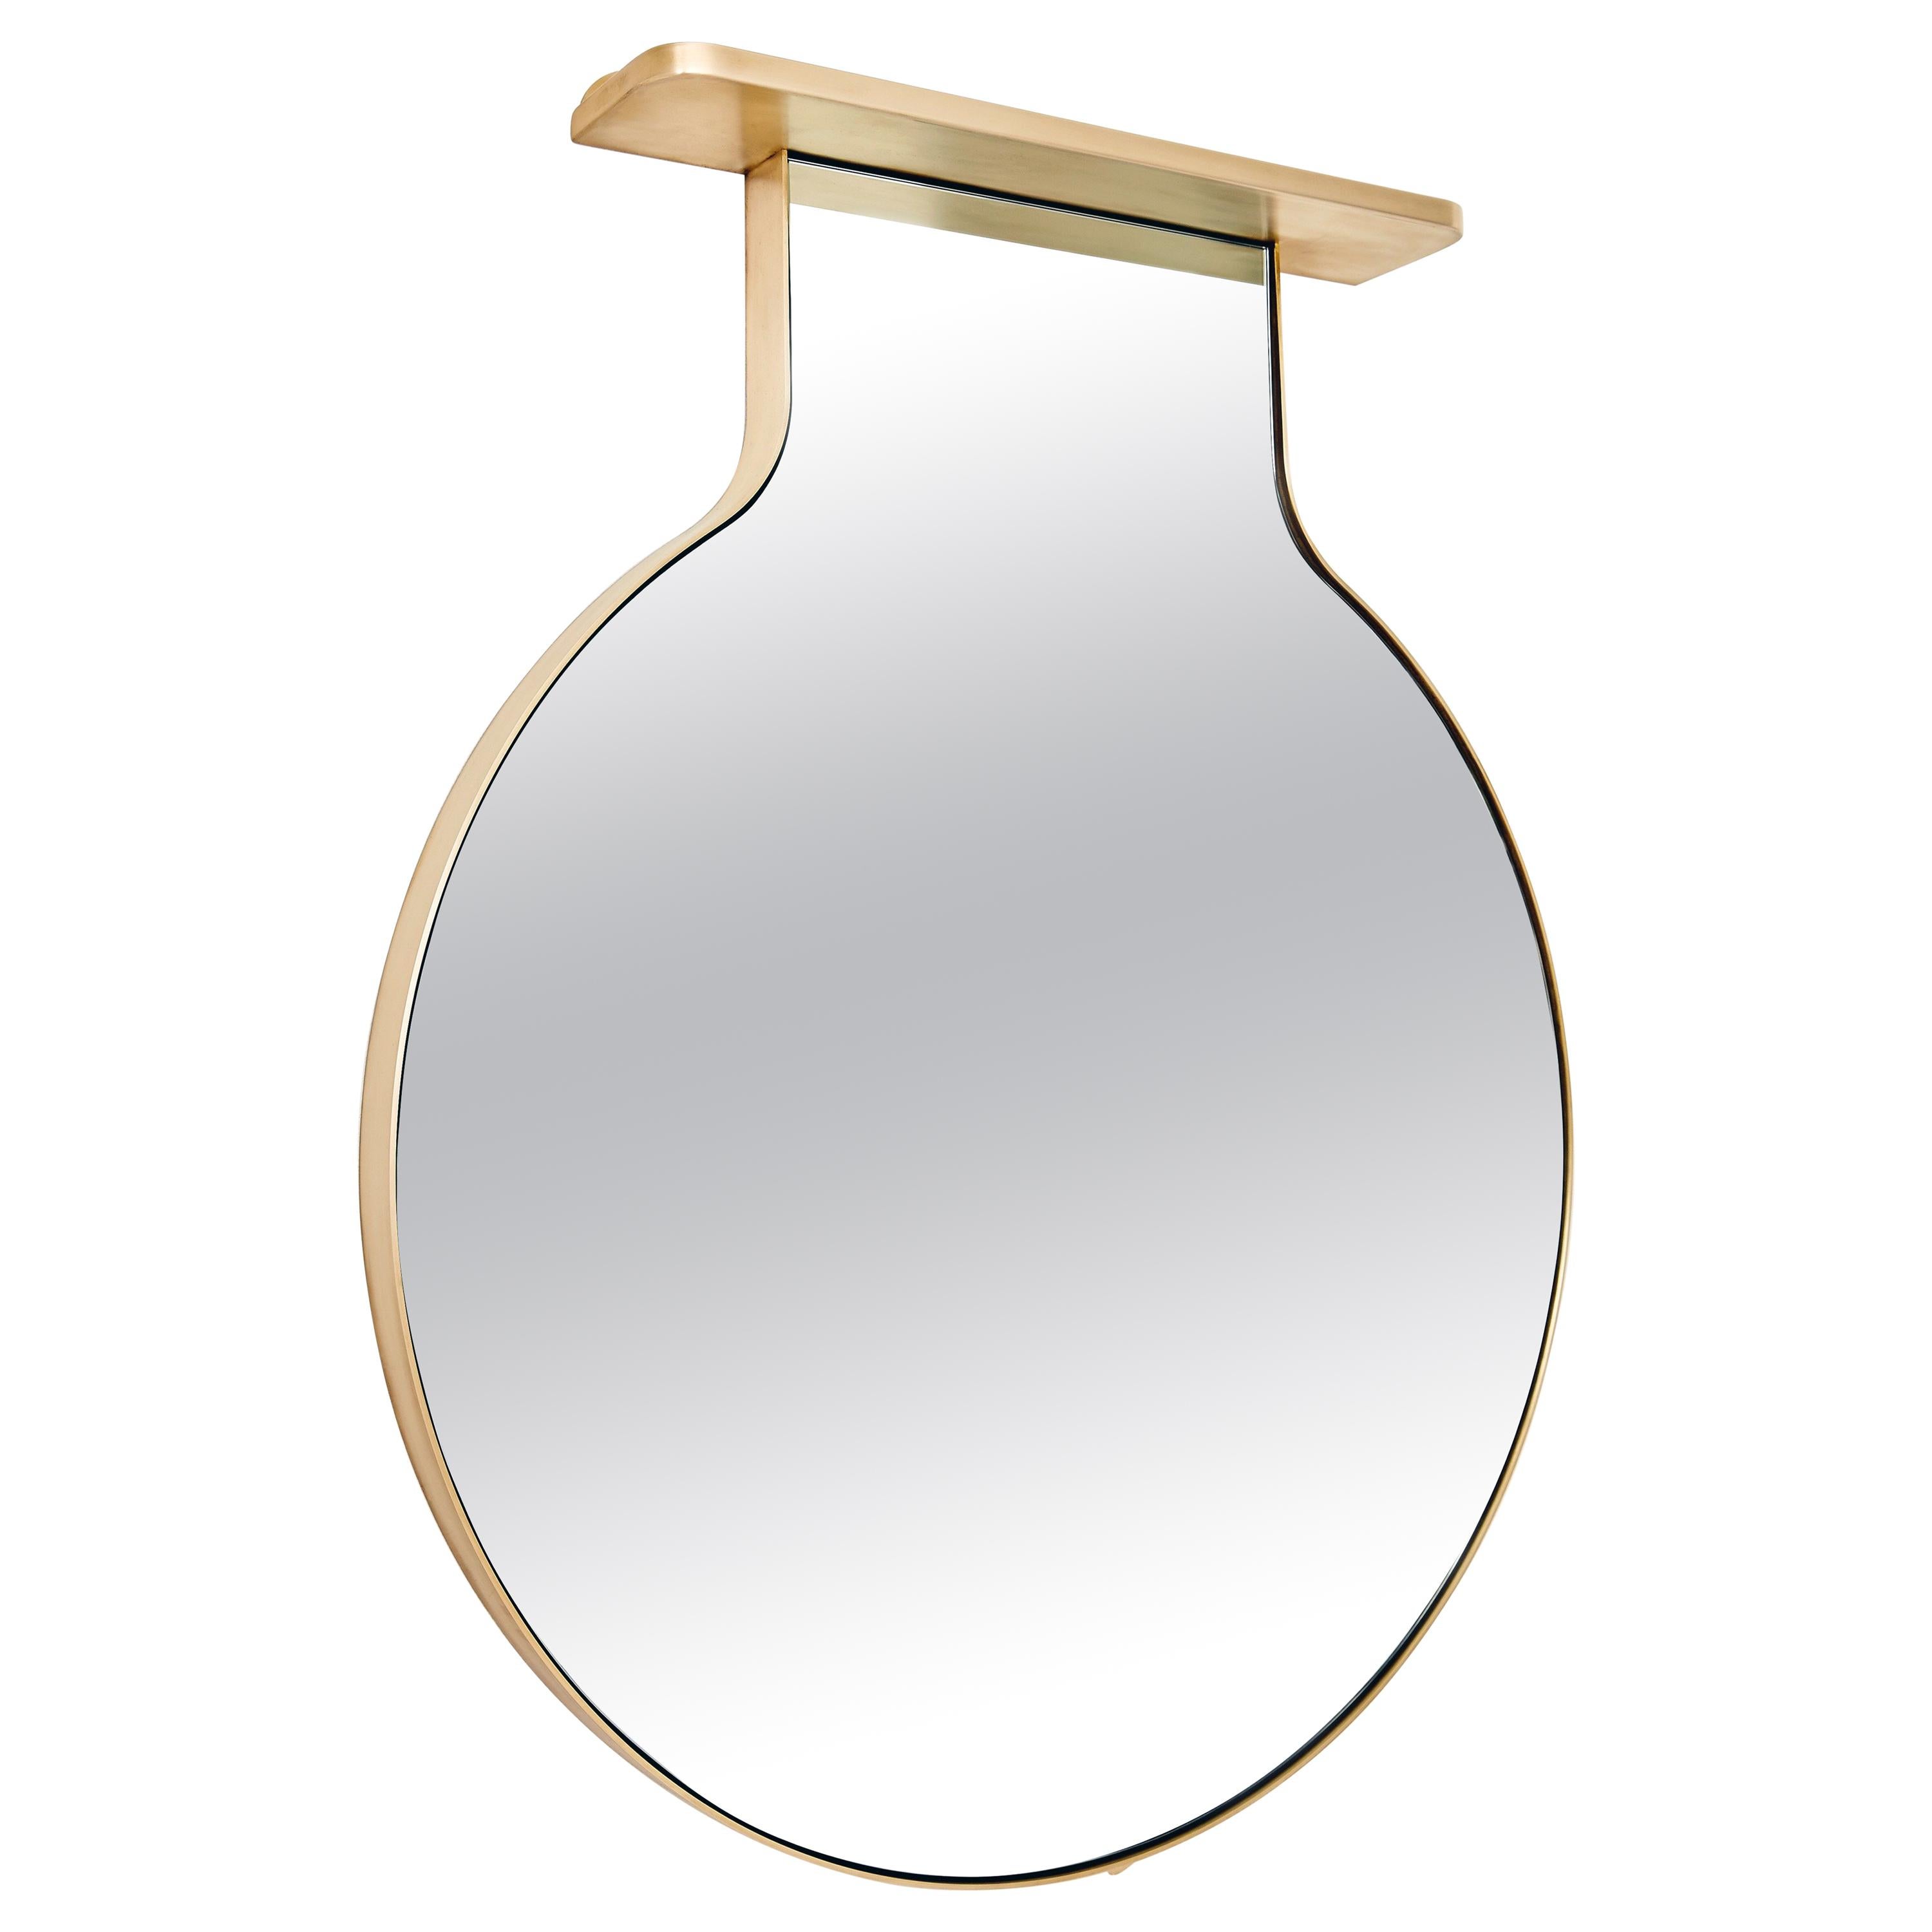 “Drip Drop Mirror”, Minimalist Brushed Bronze Wall Mirror with Shelving For Sale